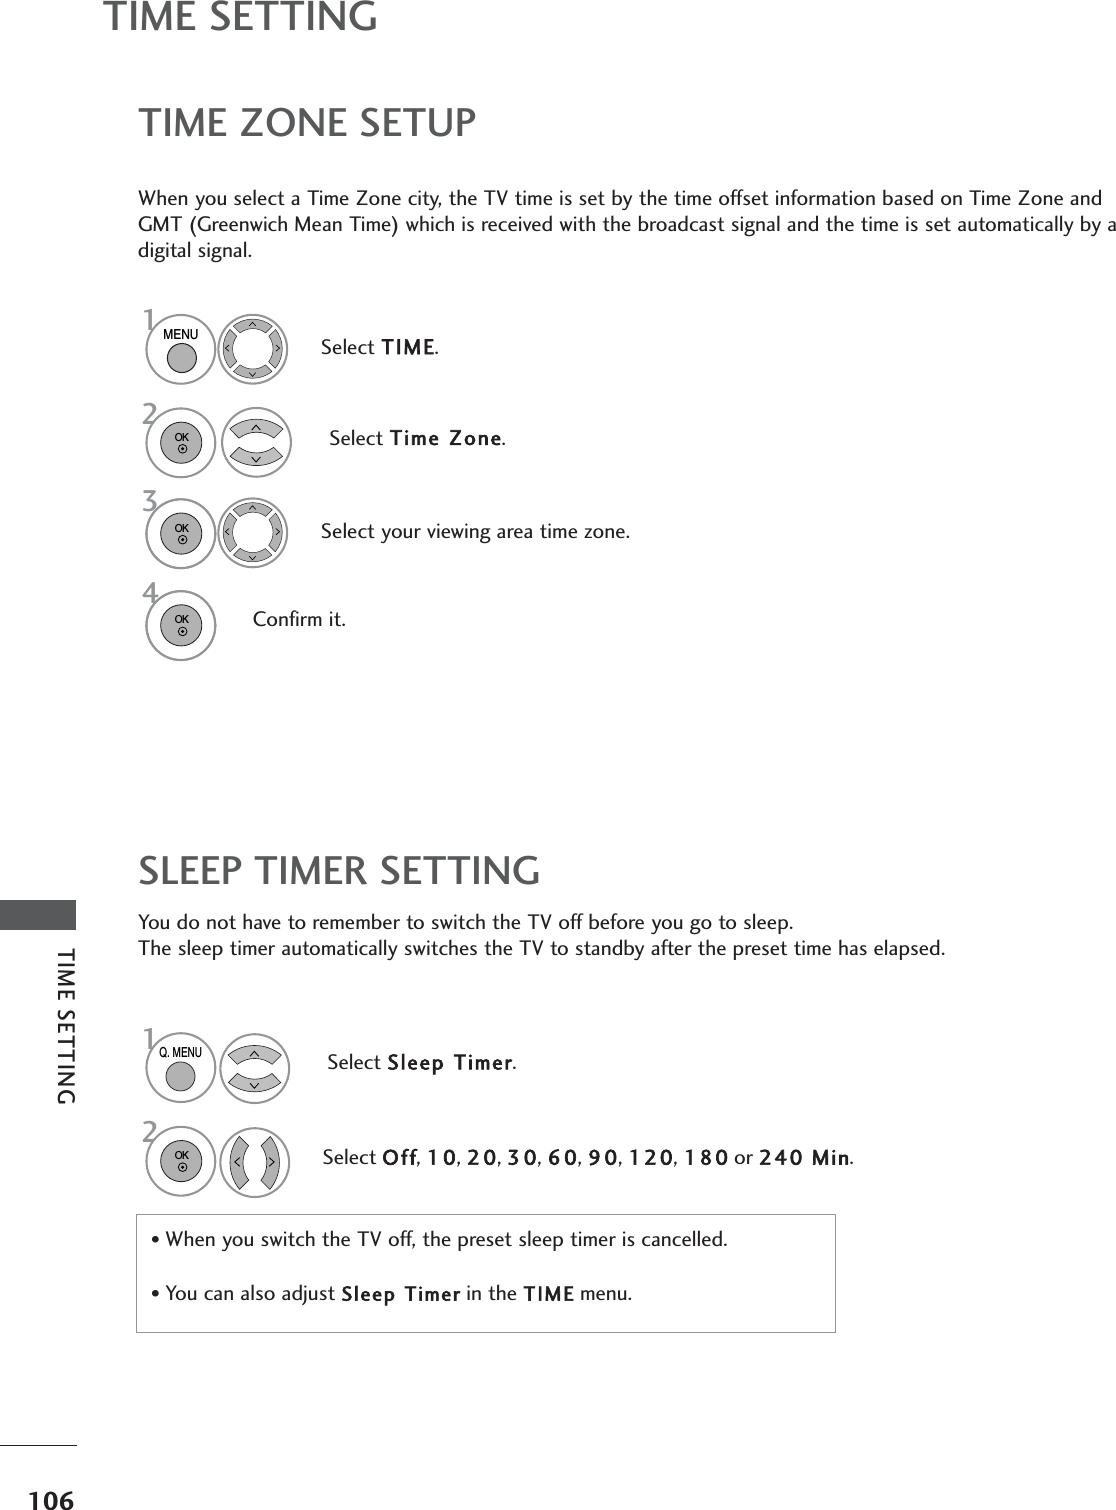 106TIME SETTINGTIME ZONE SETUPTIME SETTINGYou do not have to remember to switch the TV off before you go to sleep.The sleep timer automatically switches the TV to standby after the preset time has elapsed.SLEEP TIMER SETTINGWhen you select a Time Zone city, the TV time is set by the time offset information based on Time Zone andGMT (Greenwich Mean Time) which is received with the broadcast signal and the time is set automatically by adigital signal.Select TIME.Select Time Zone.Select your viewing area time zone.Confirm it.• When you switch the TV off, the preset sleep timer is cancelled.• You can also adjust Sleep Timerin the TIMEmenu.Select Sleep Timer.Select Off, 1 0, 2 0, 3 0, 6 0, 9 0, 120, 180or 240 Min.1MENU32OK OK OK 4OK OK 1Q. MENU2OK 